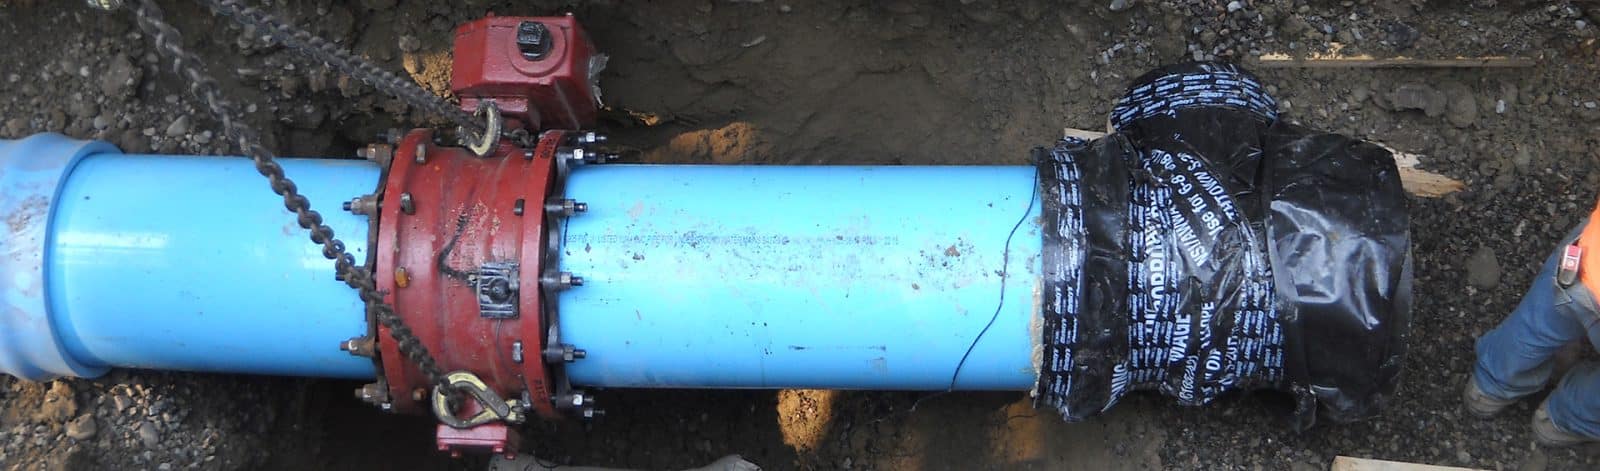 How to Design a Successful Water Main Replacement Project